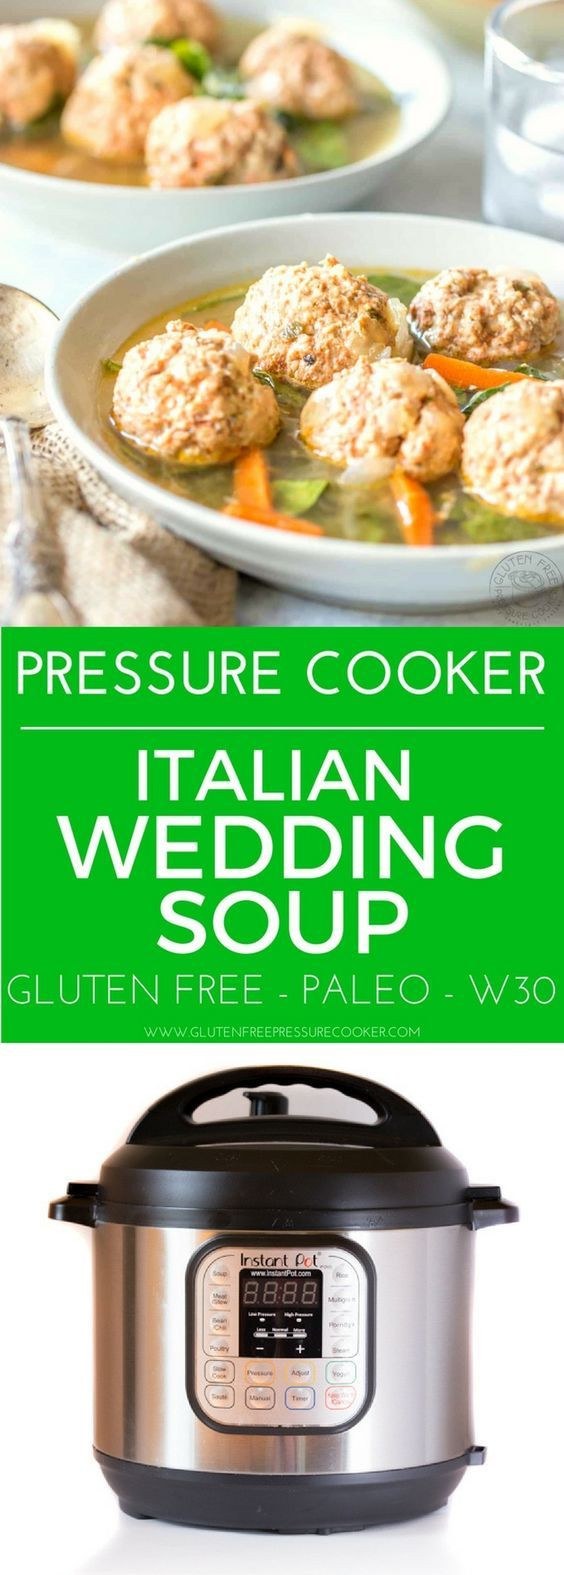 Electric Pressure Cooker Breakfast Recipes
 Pressure Cooker Italian Wedding Soup this recipe is